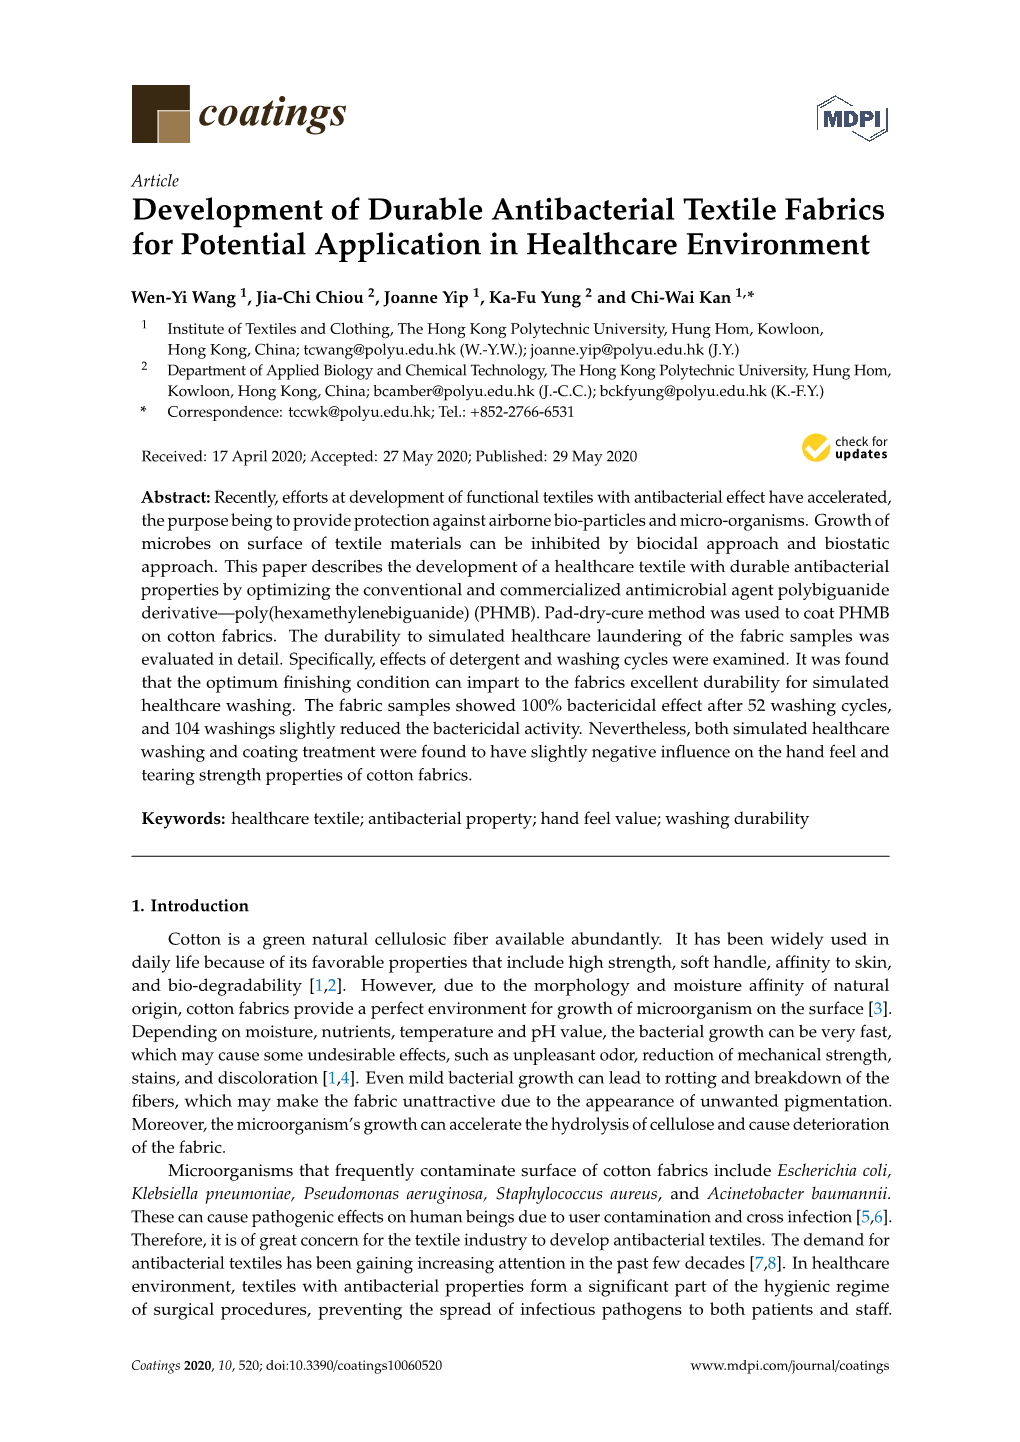 Development of Durable Antibacterial Textile Fabrics for Potential Application in Healthcare Environment